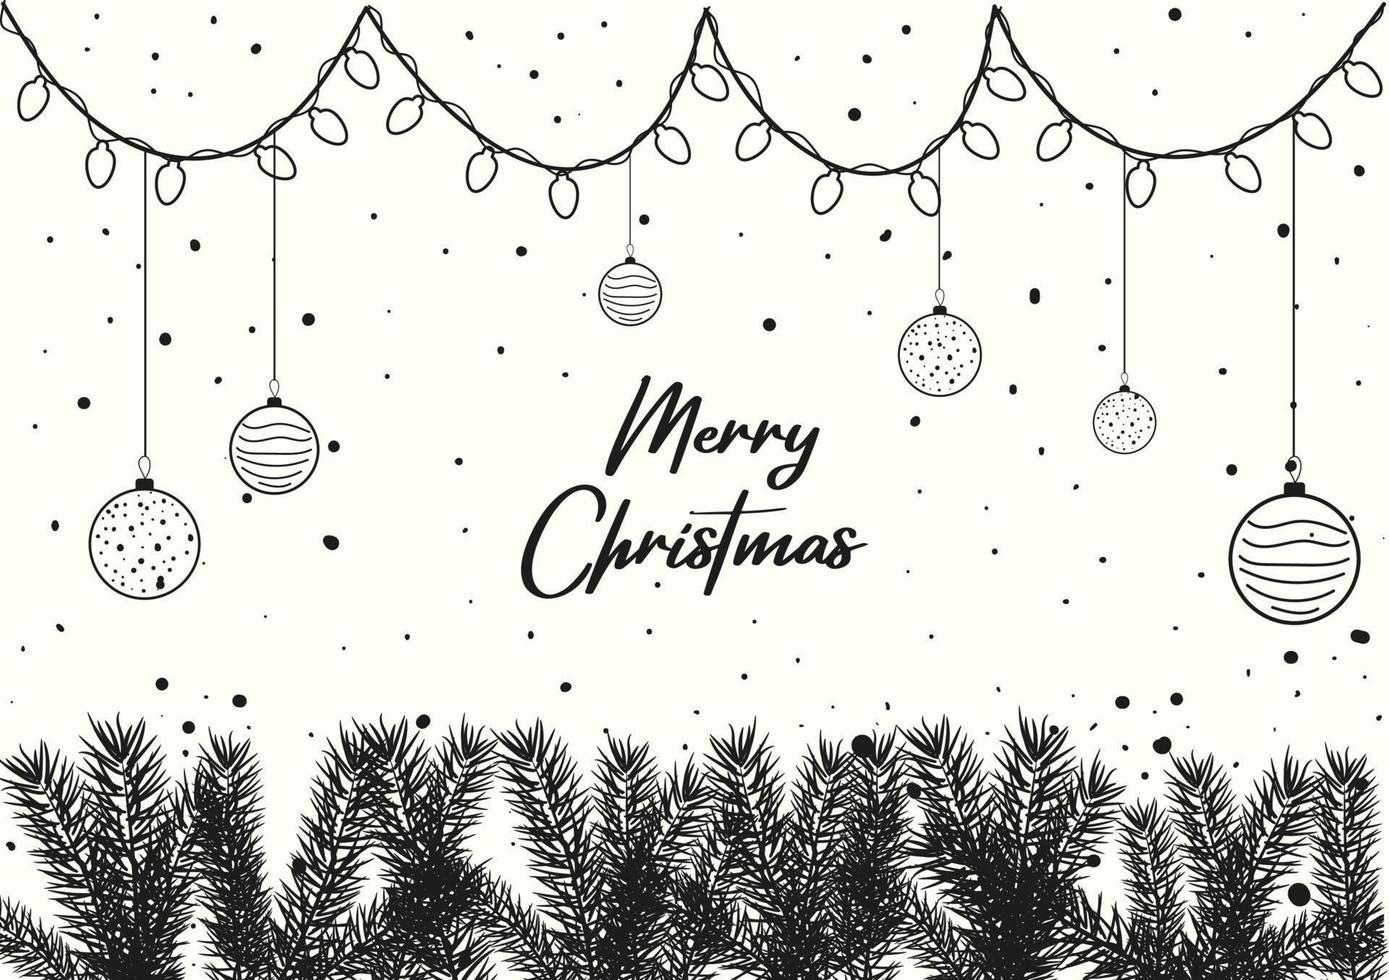 Hand drawn Christmas Background with Christmas tree branch balls and Christmas lights on white background vector